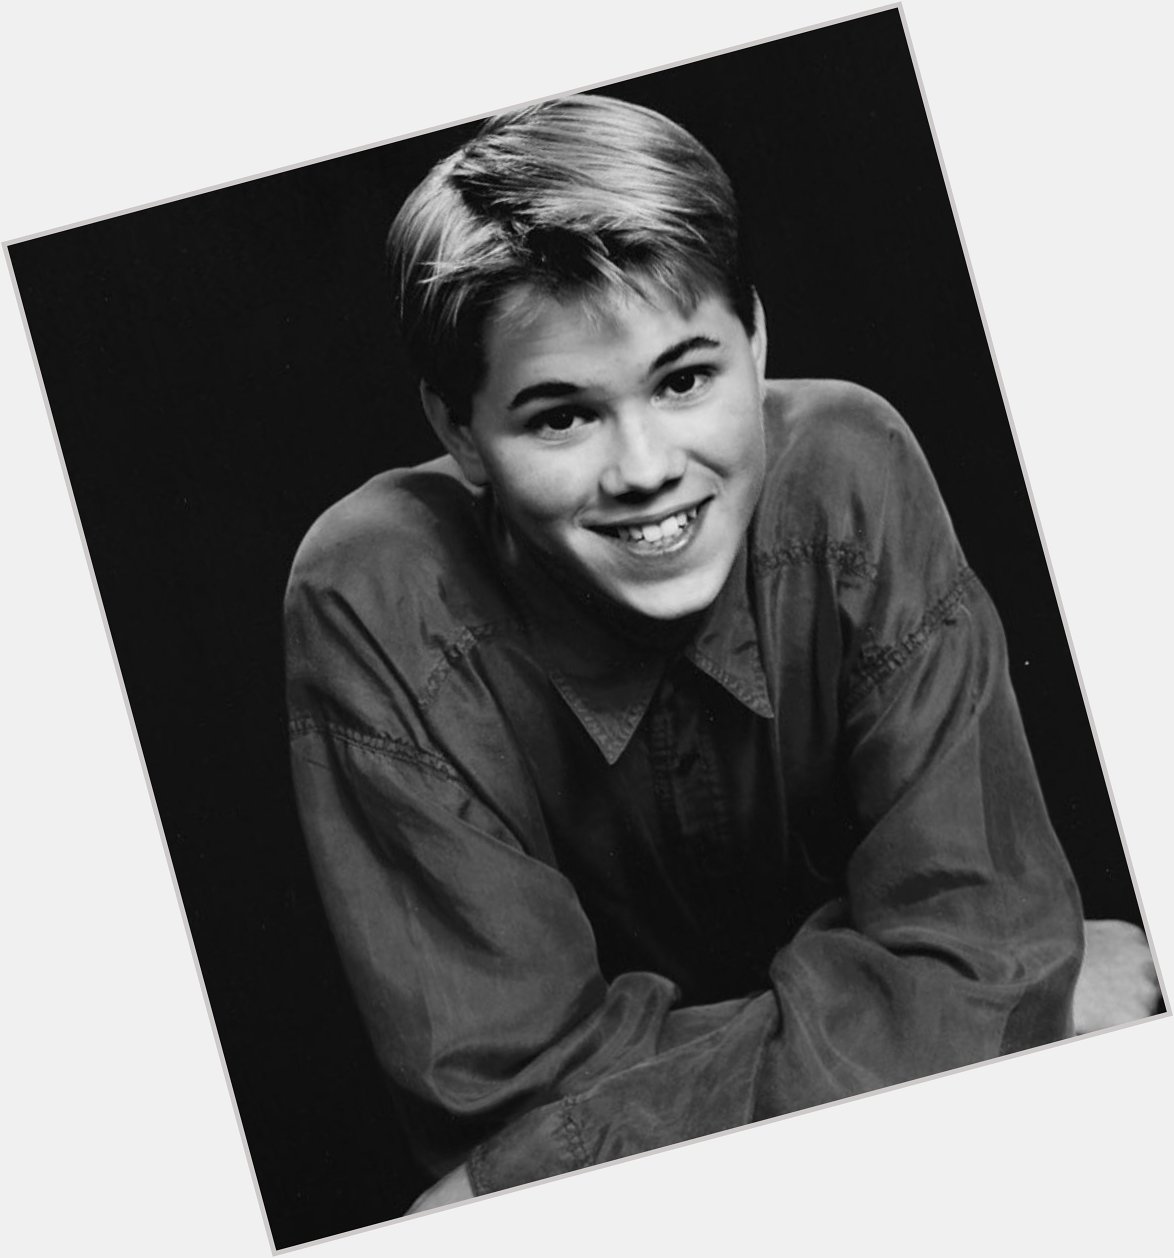 Happy birthday to the only man ever*

*andrew rannells 